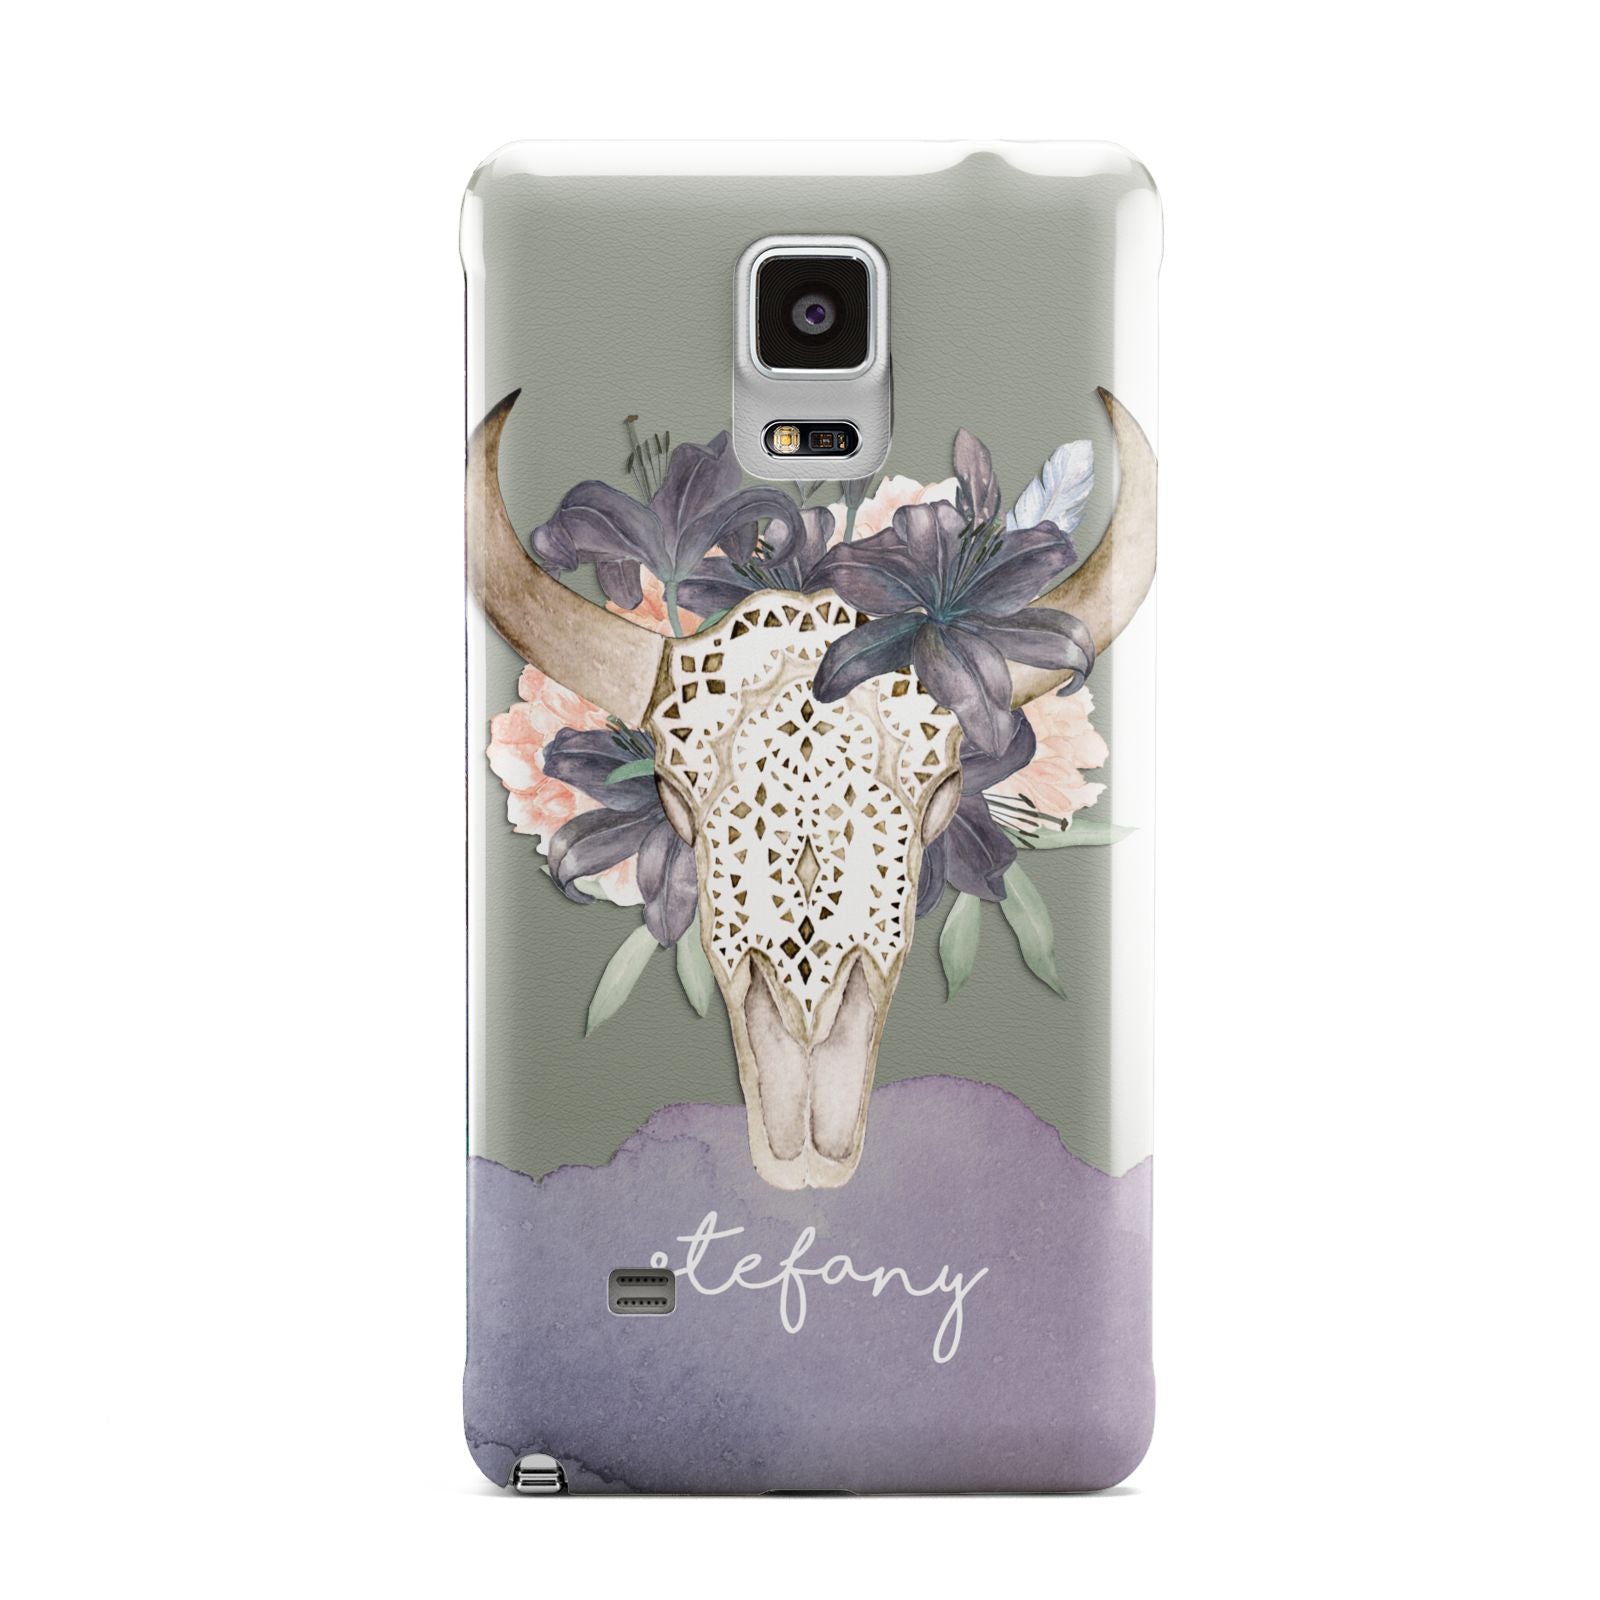 Personalised Bull s Head Samsung Galaxy Note 4 Case